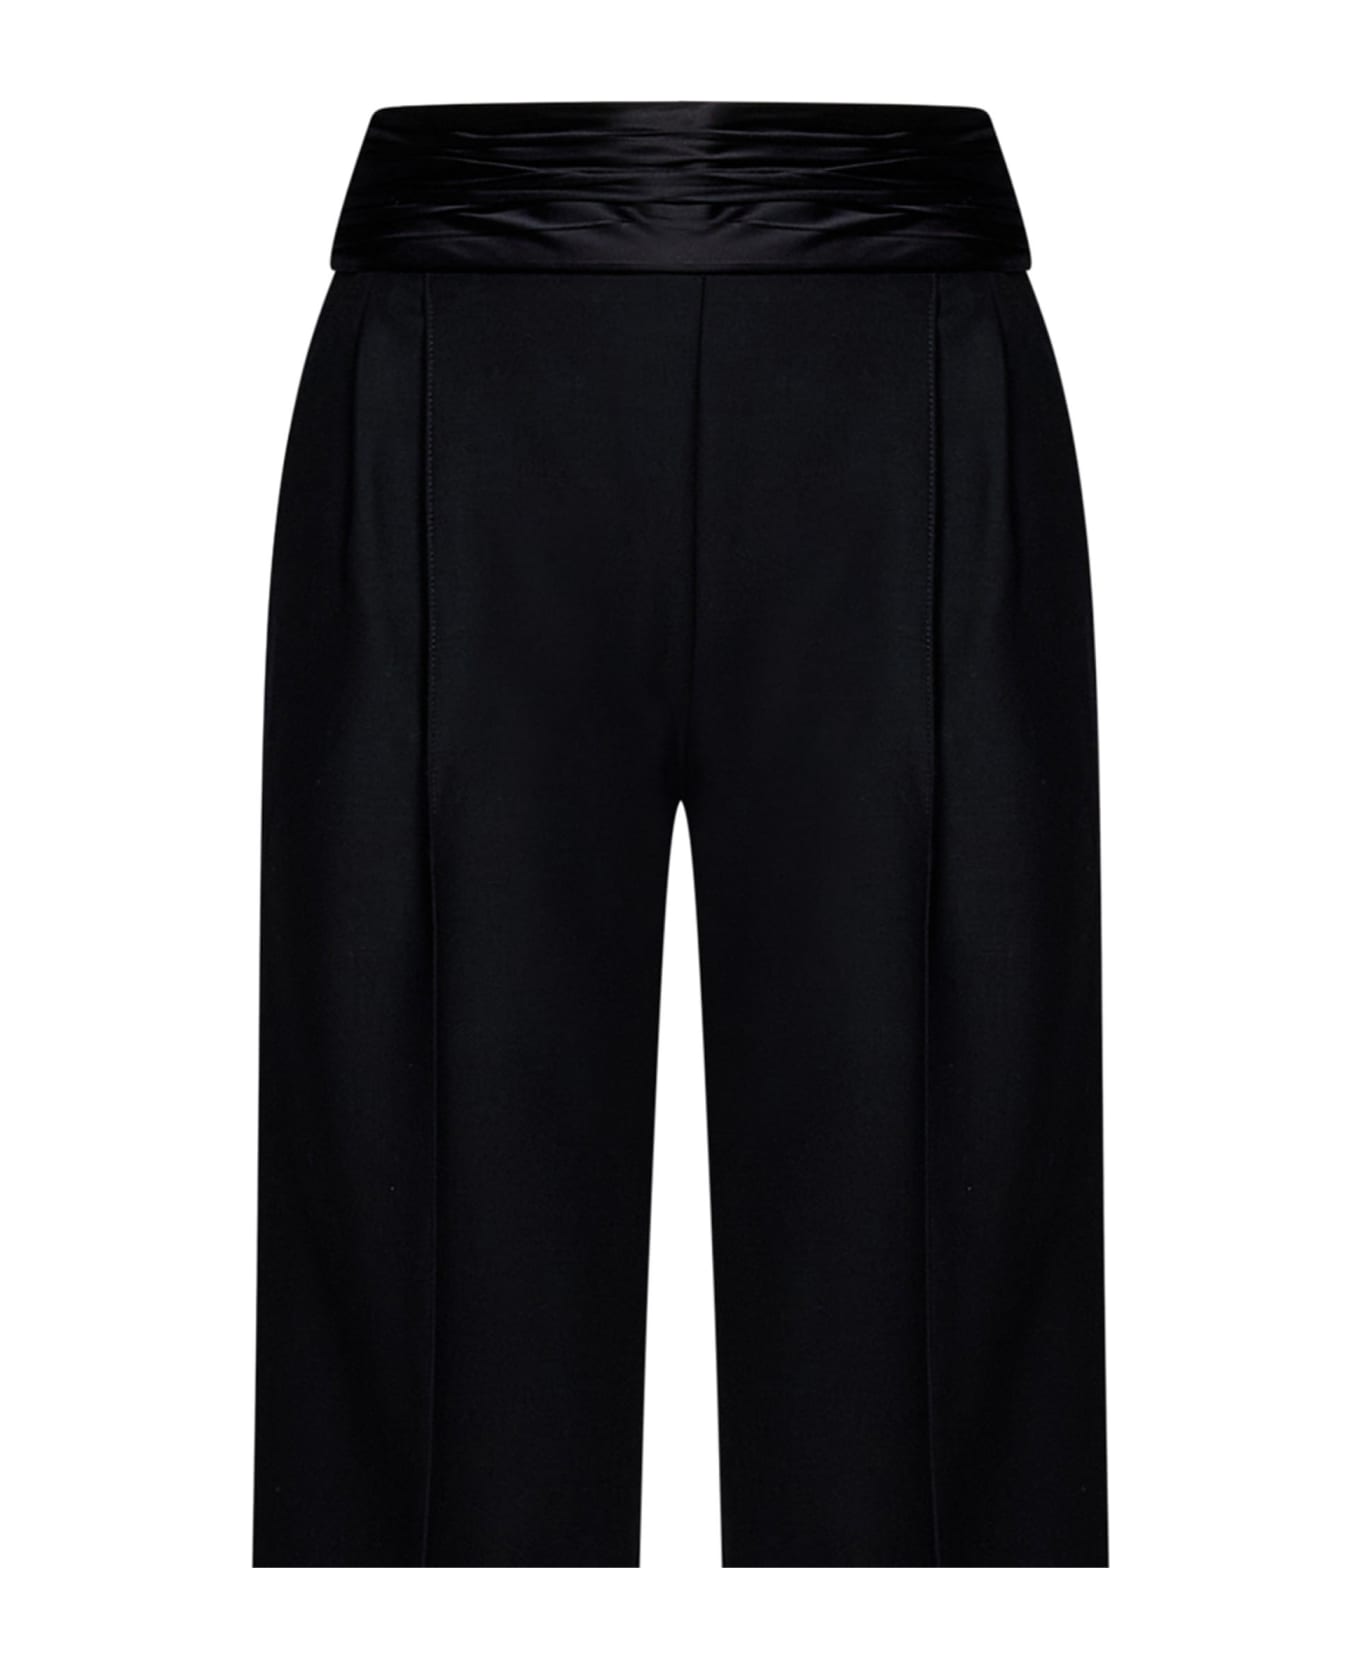 Laquan Smith Trousers - Black